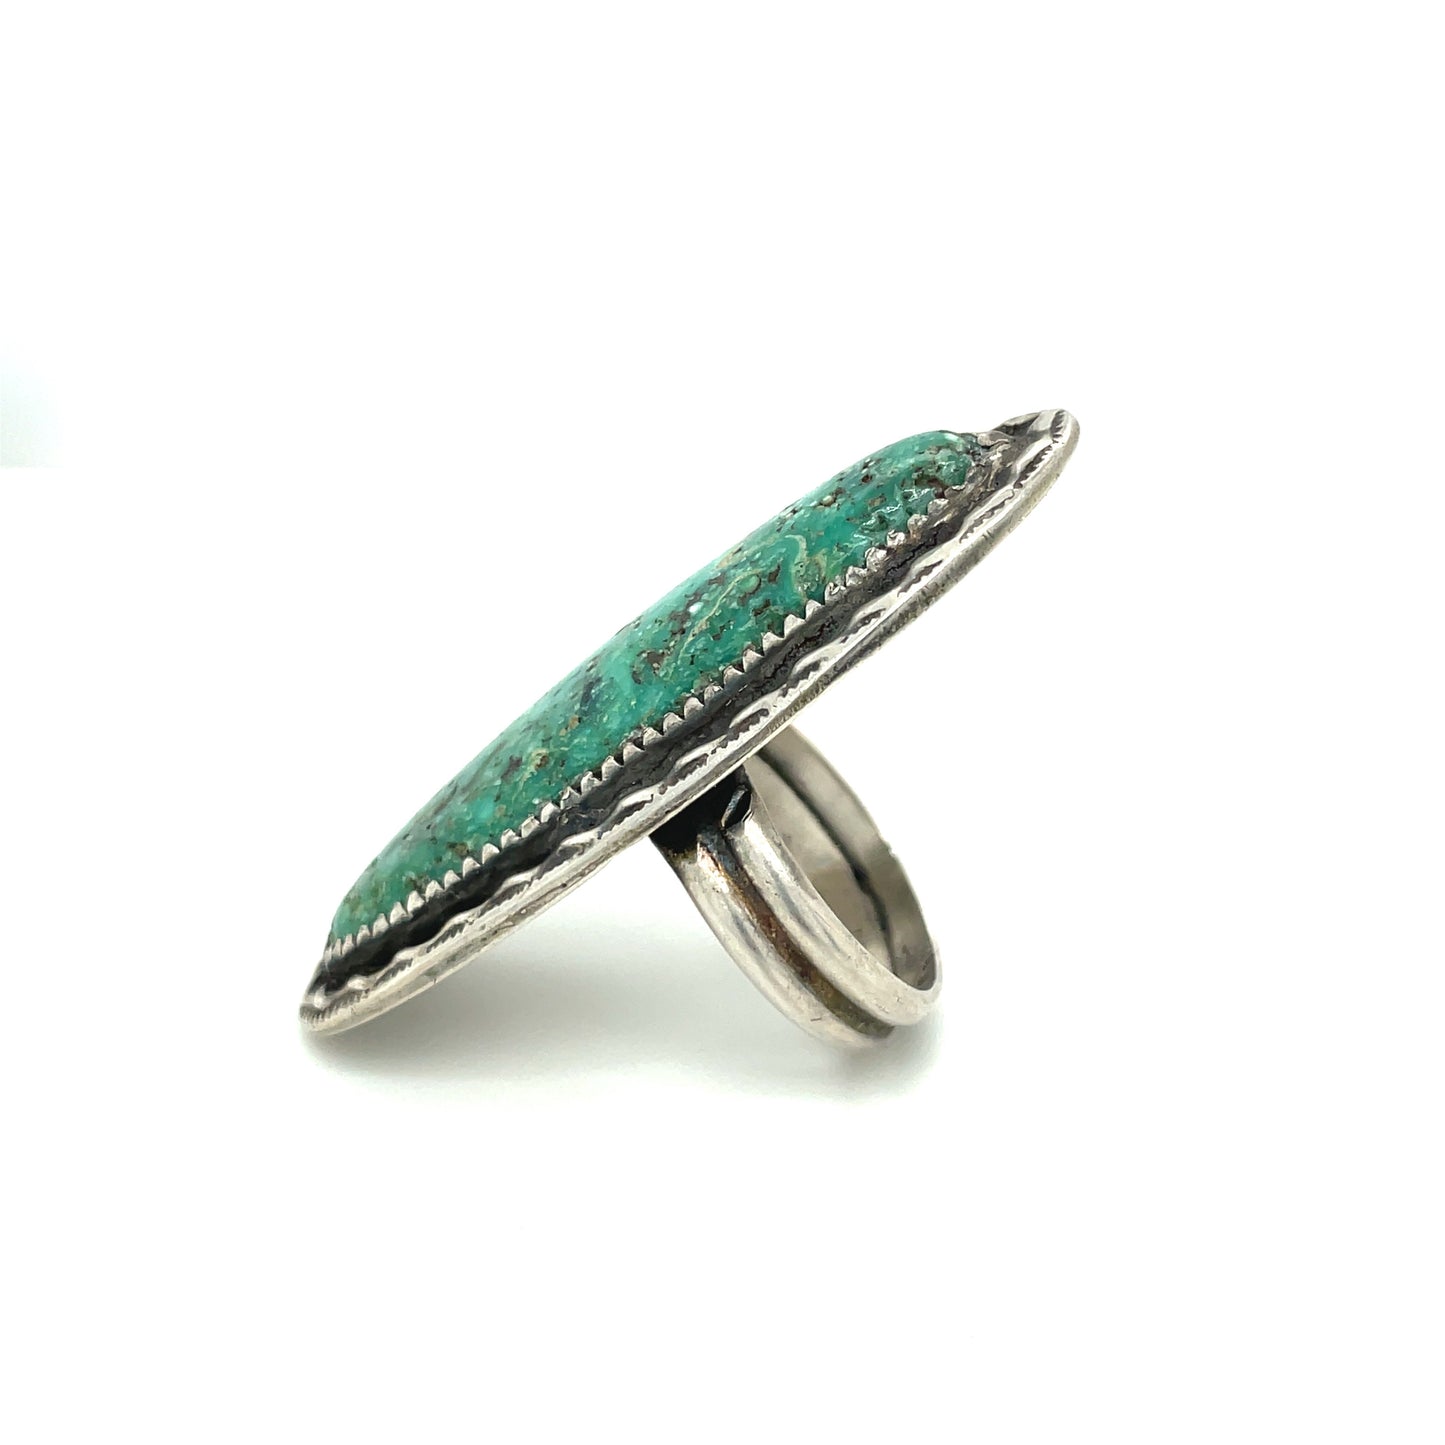 Nevada Turquoise Sterling Silver Ring Size 7 1/2